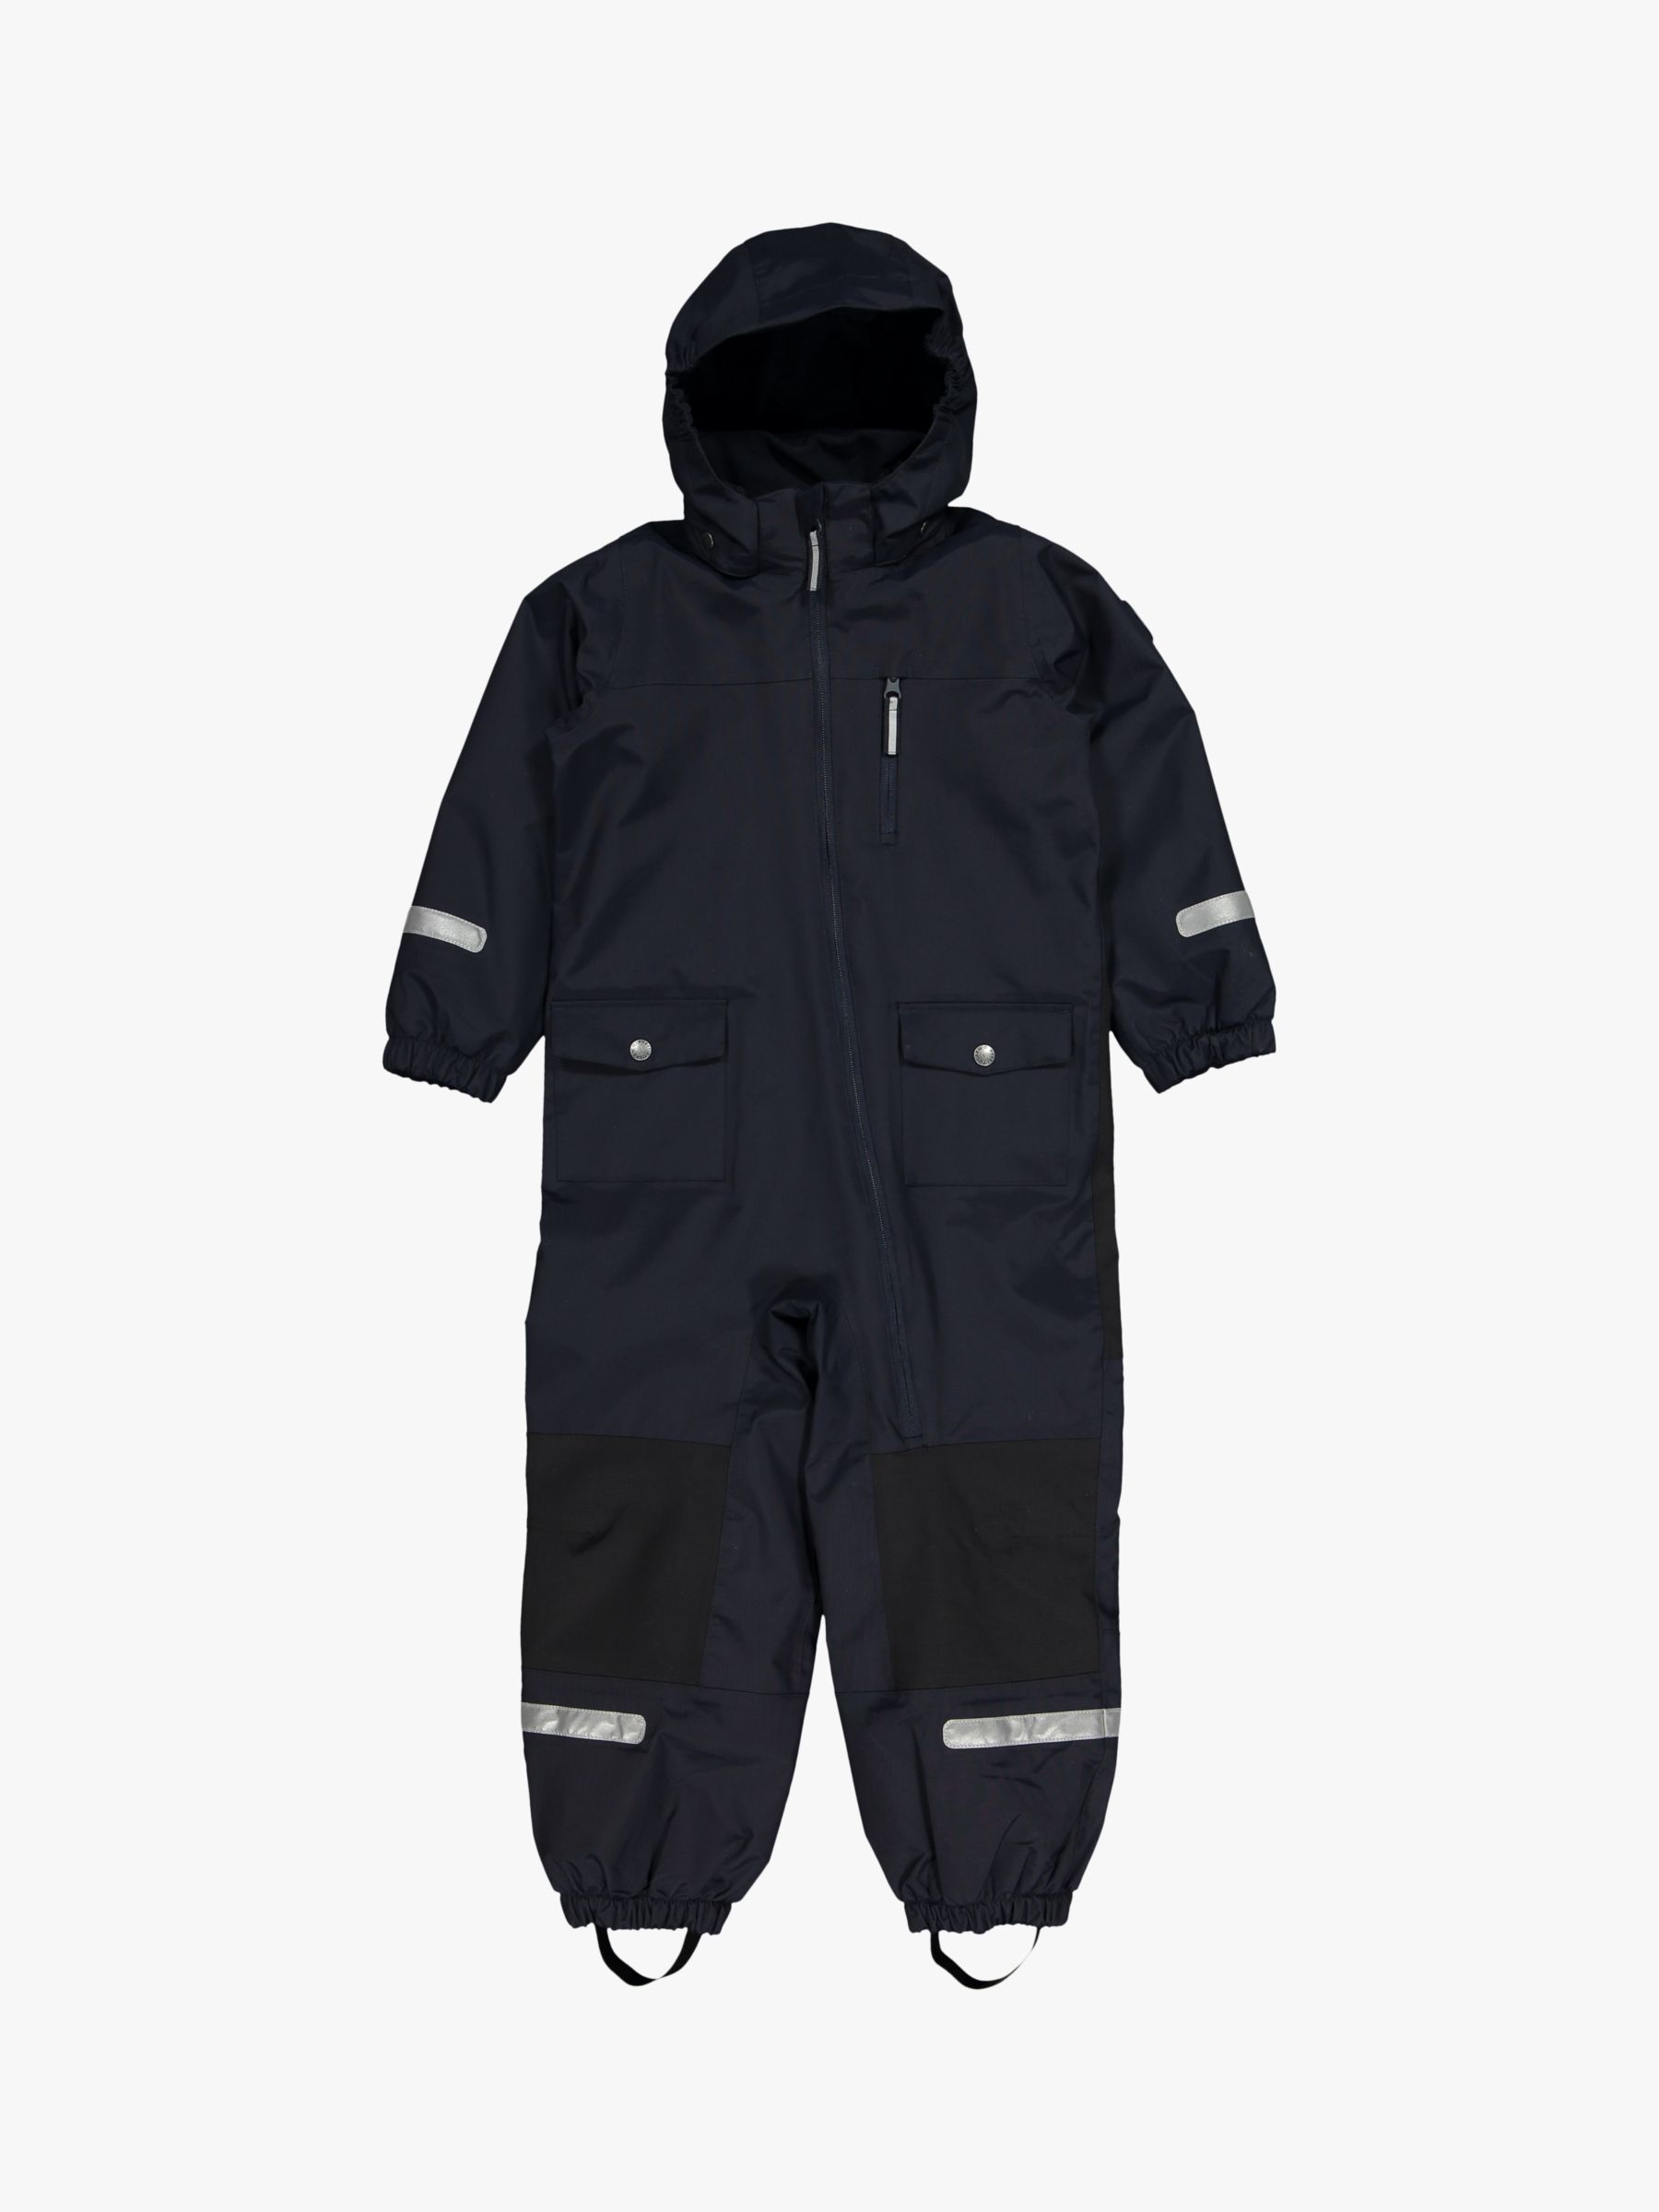 Image of Polarn O Pyret Childrens Waterproof Shell Overall Dark Sapphire